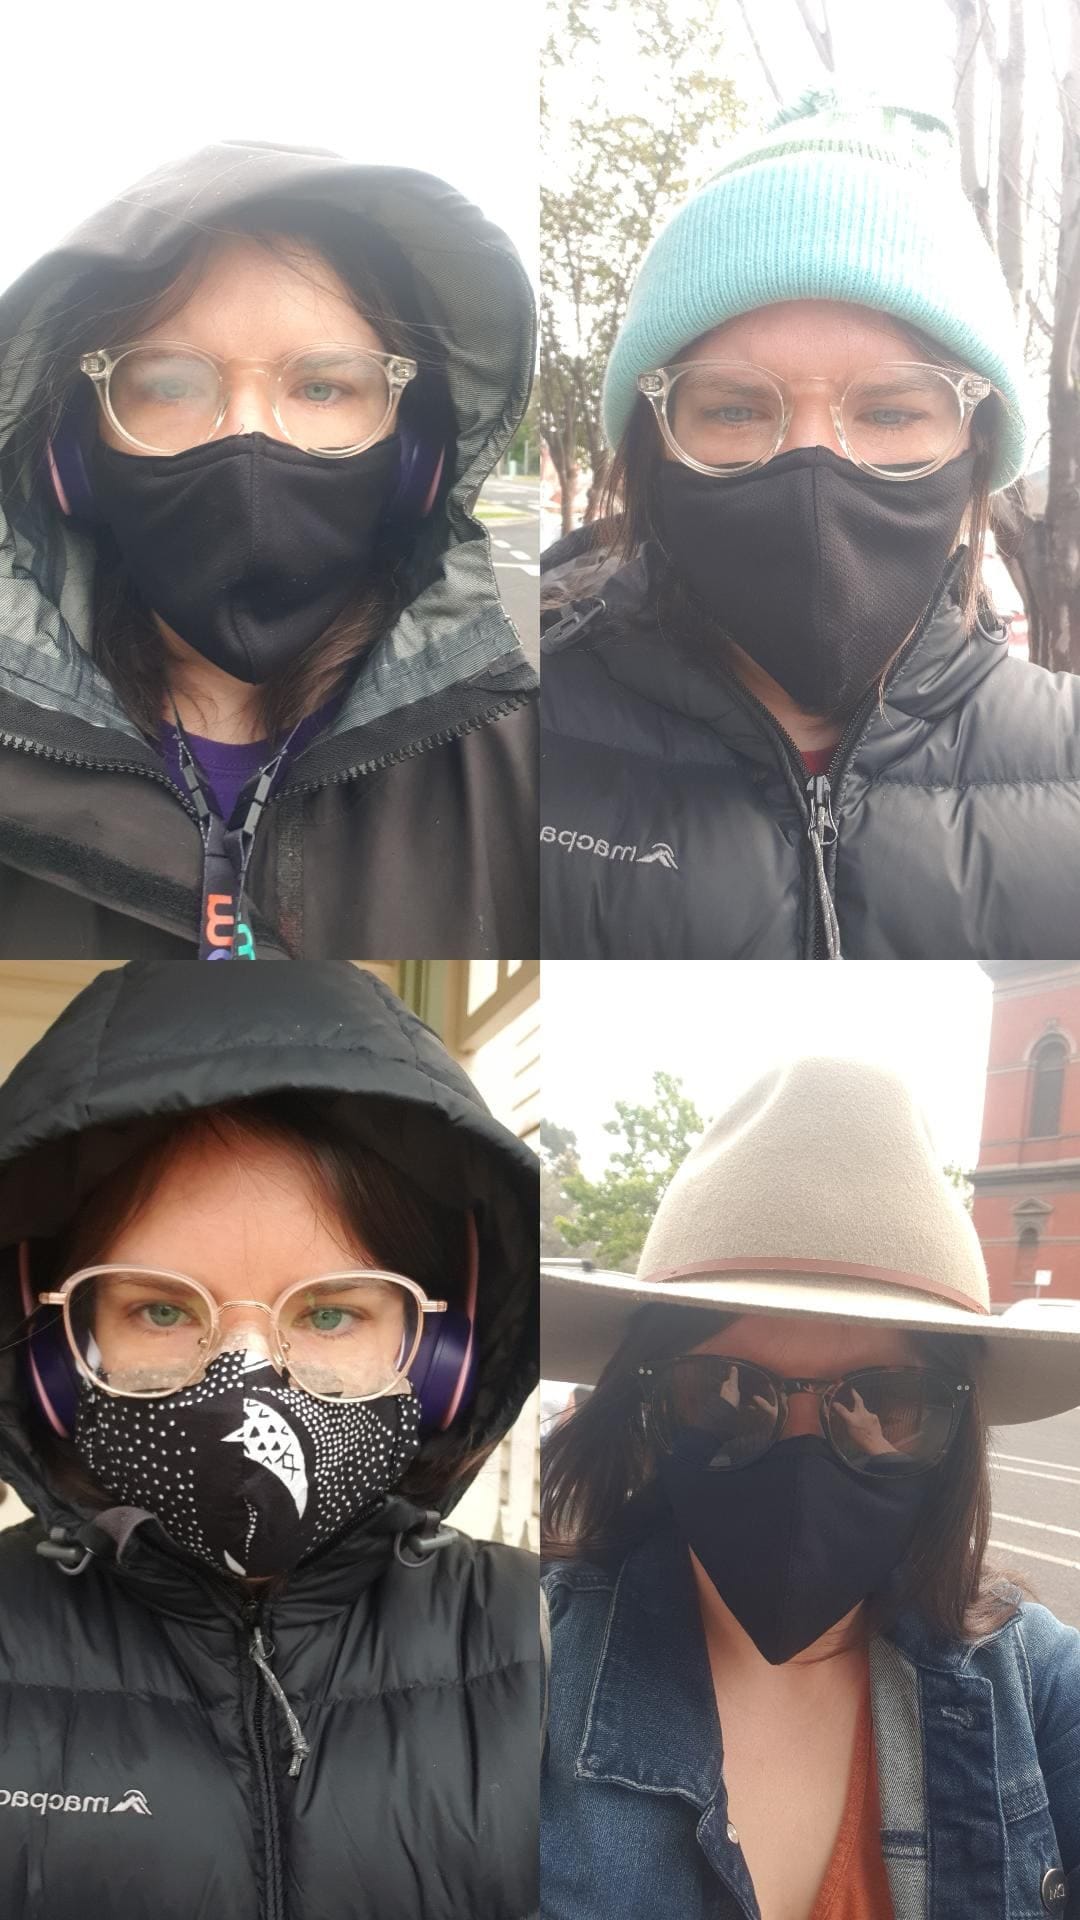 Four selfies of a white woman wearing glasses, a face mask and a hat